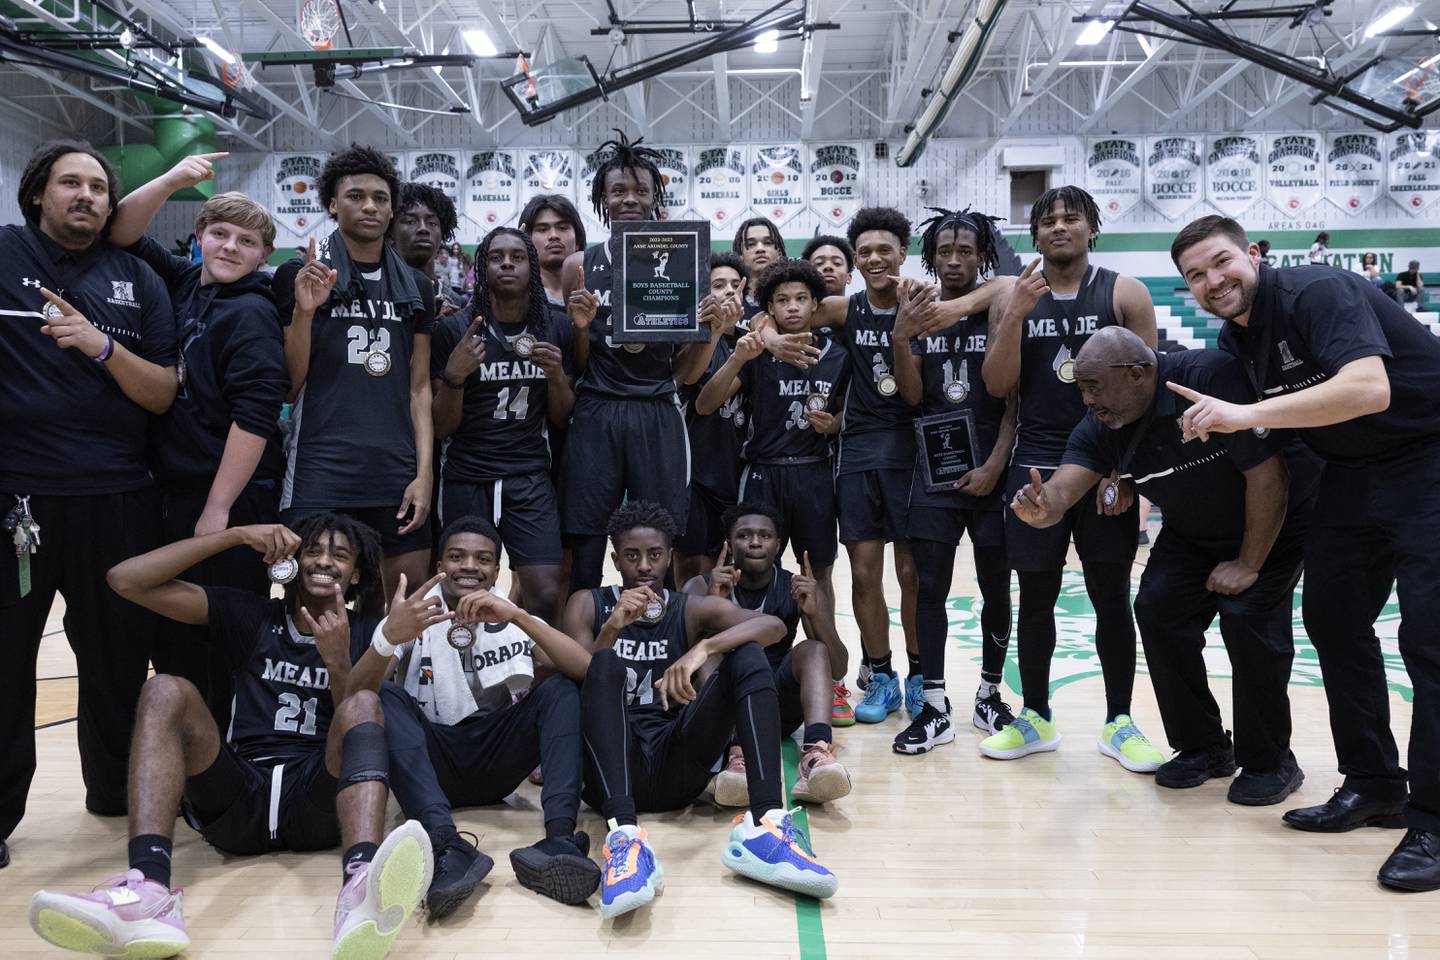 Meade players and coaches pose for a photo following their victory in the Anne Arundel County Boys Basketball Championship game in Odenton, Md., on Saturday, February 18, 2023.  Meade defeated Broadneck 60-51 in regulation time to win the championship.